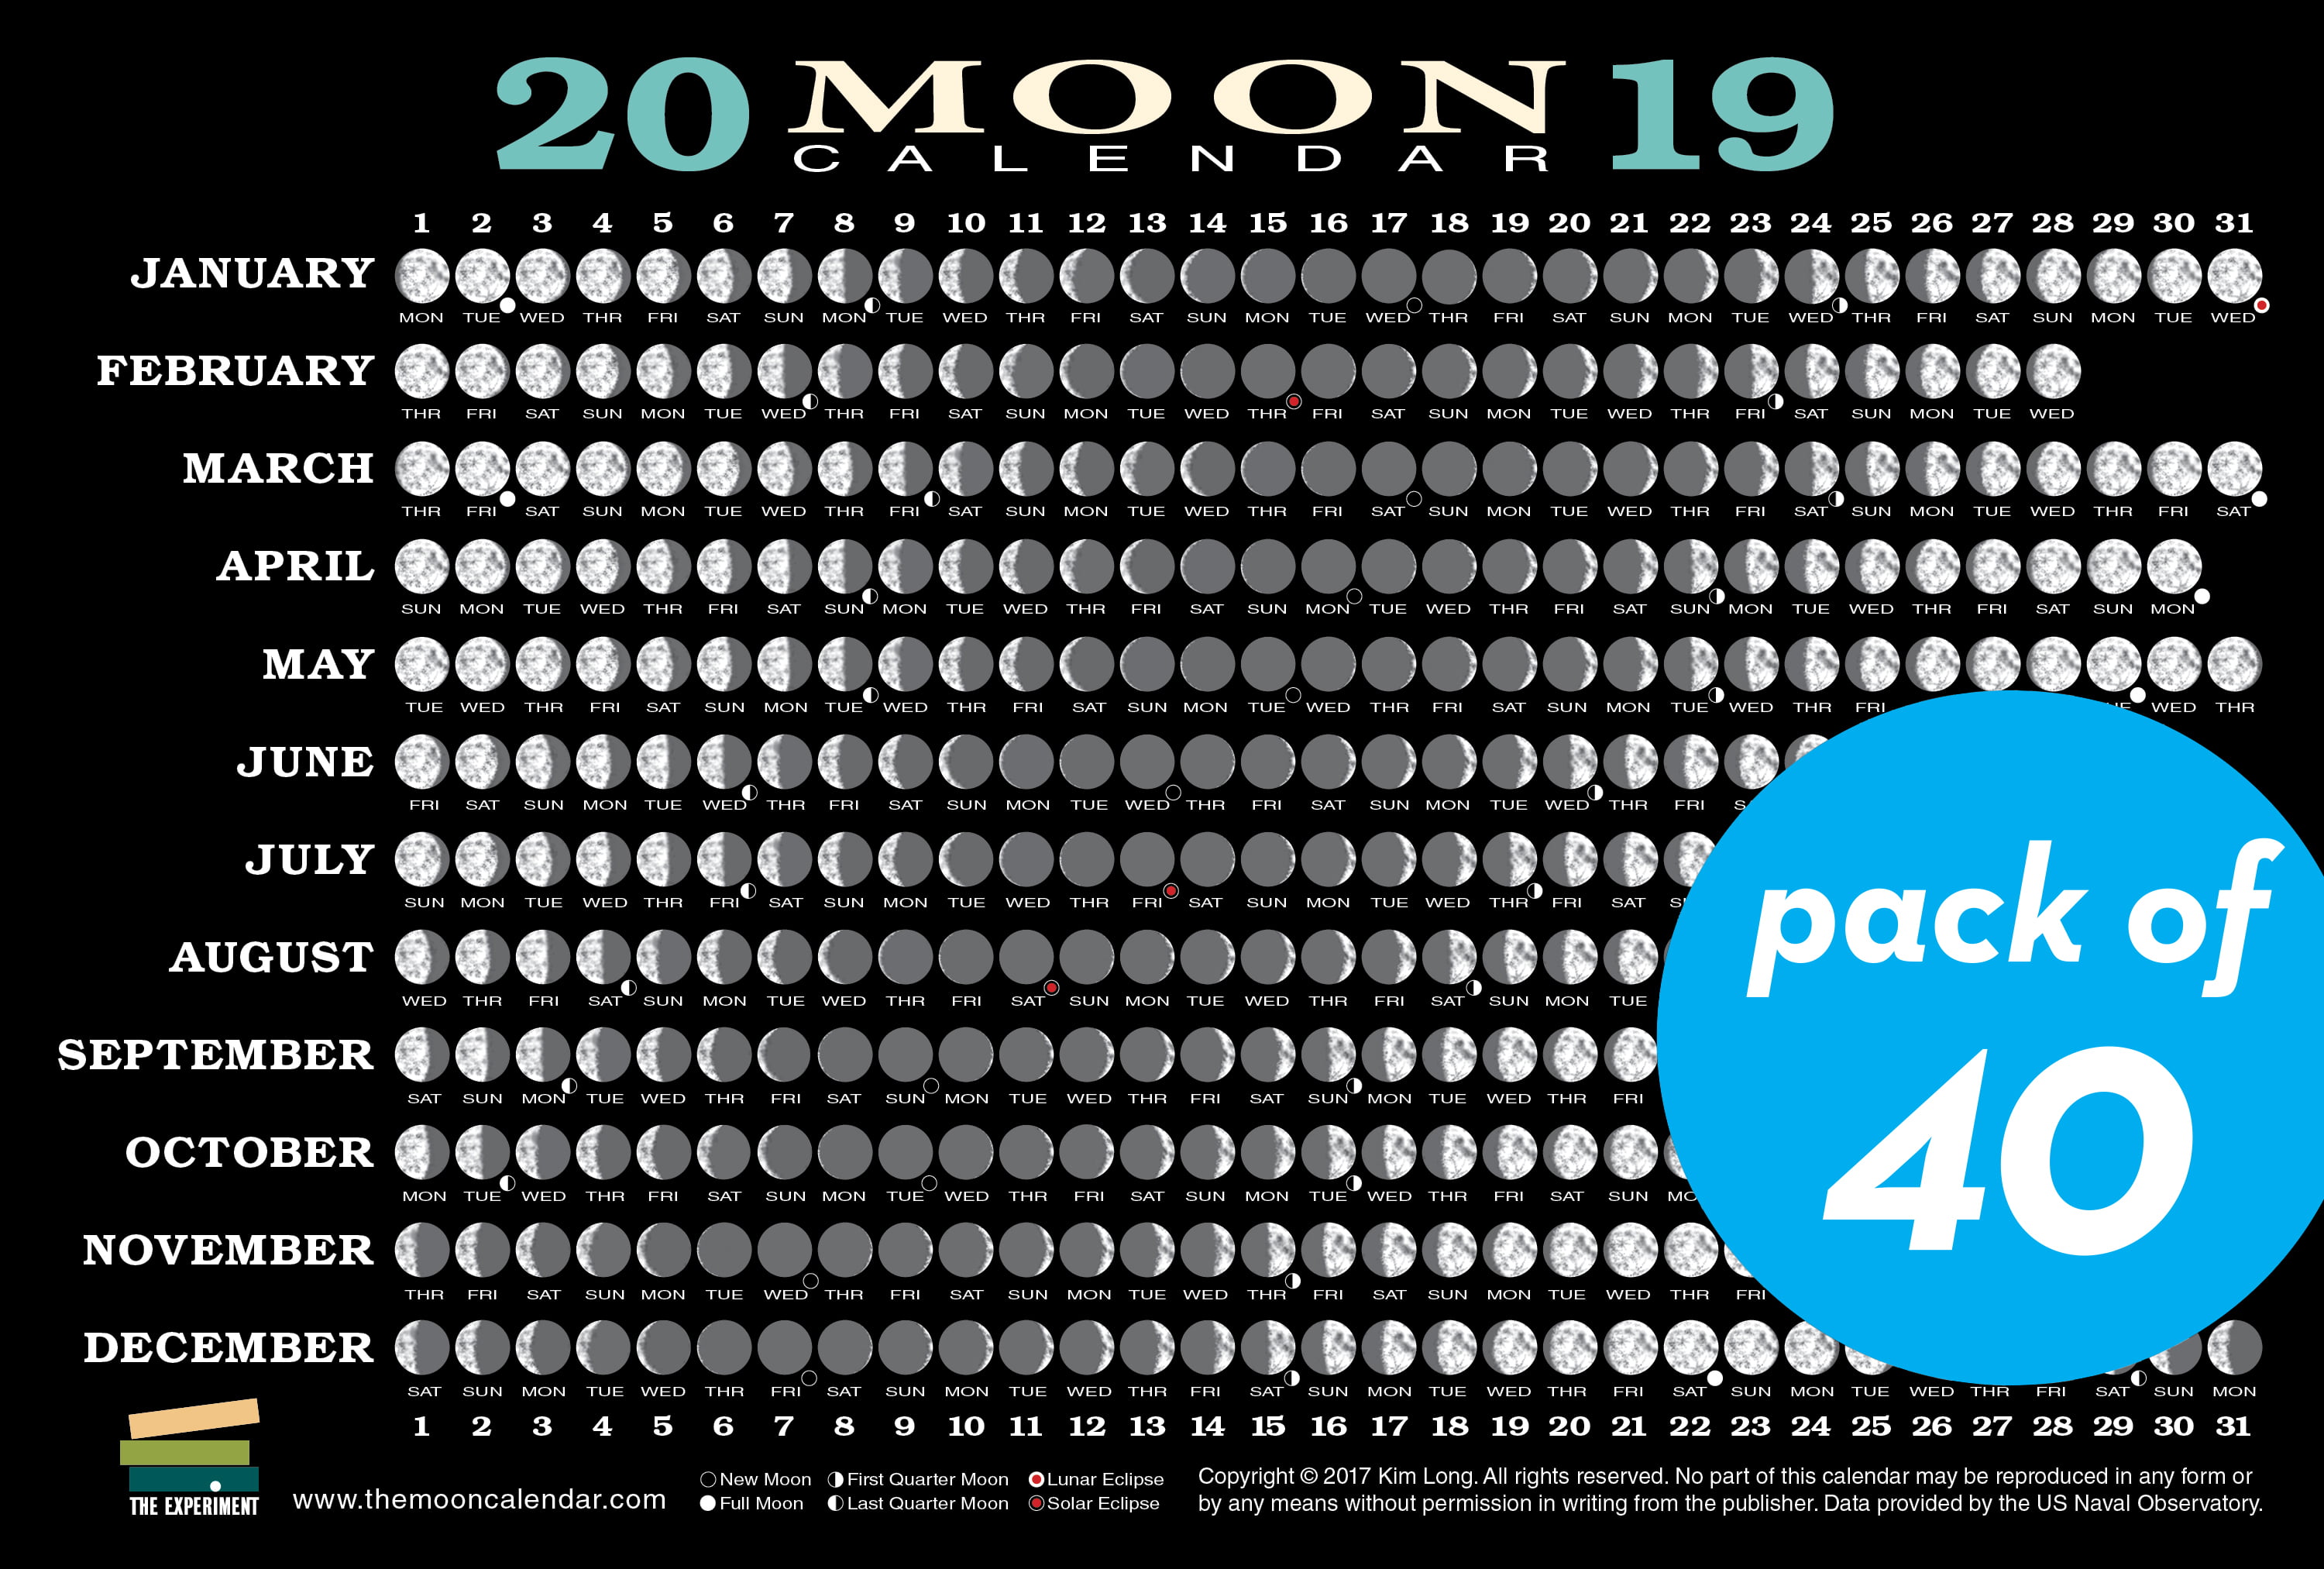 2019 Moon Calendar Card (40 pack) Lunar Phases, Eclipses, and More